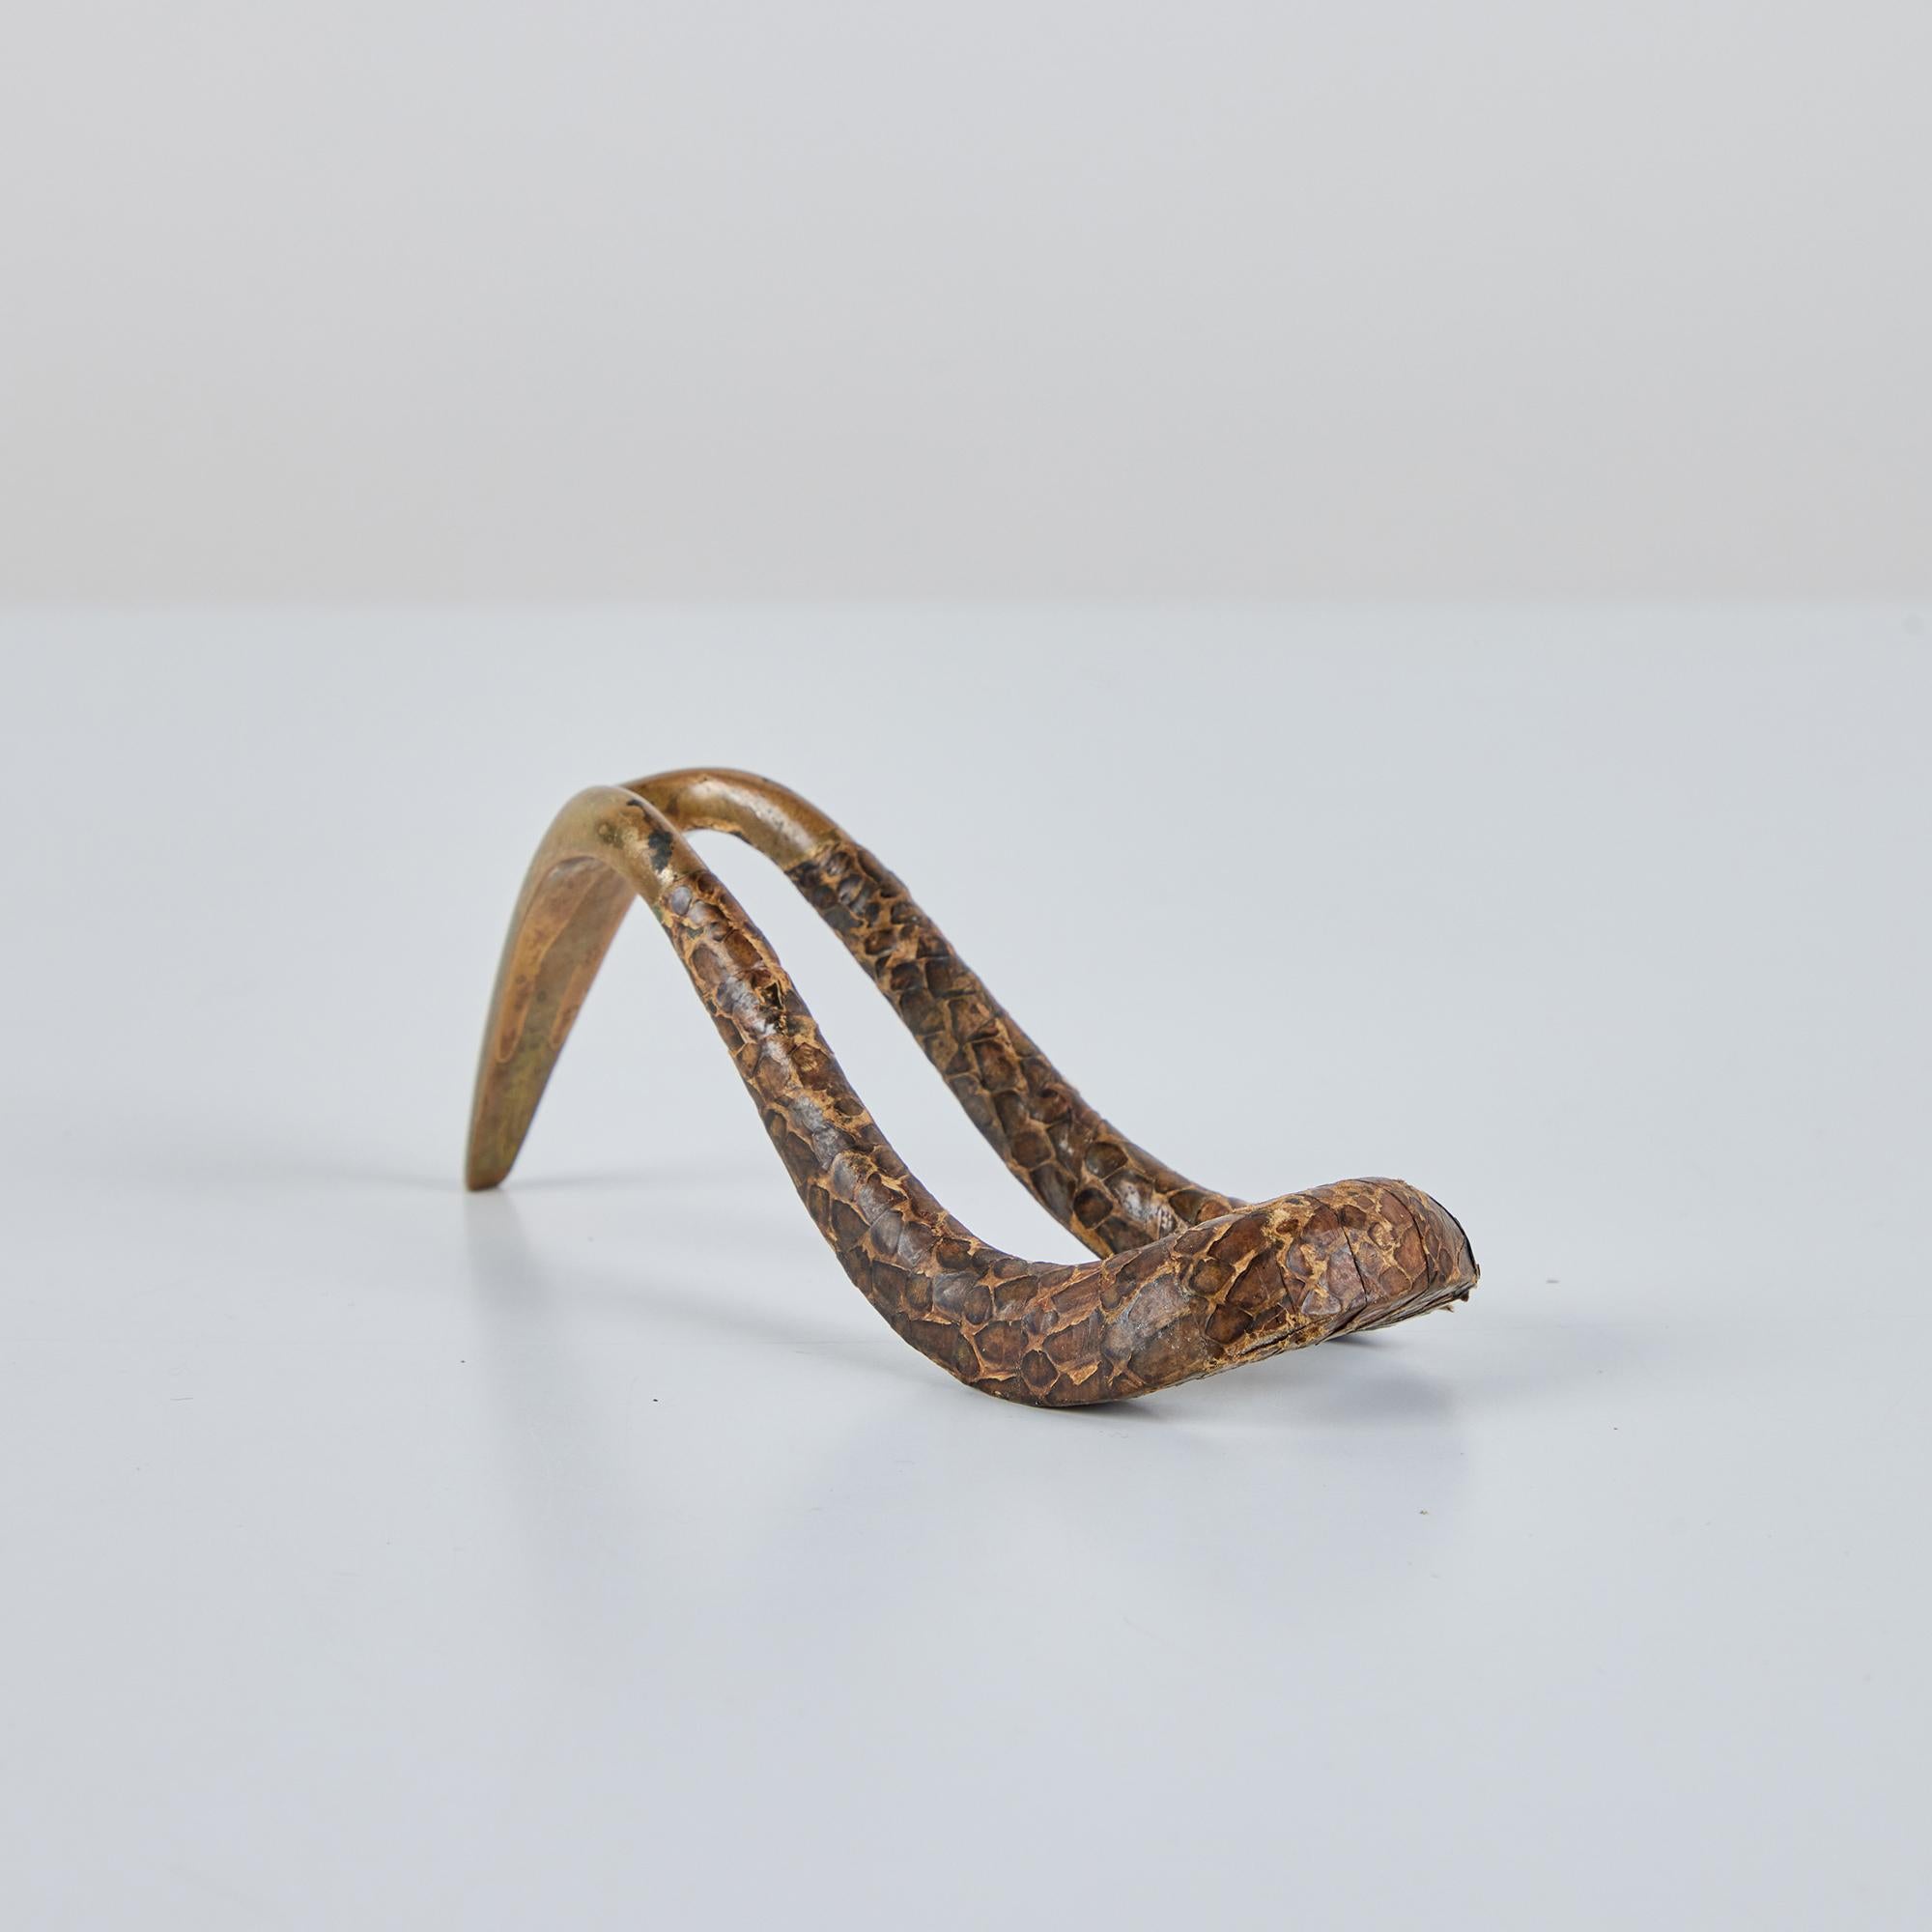 Brass and snakeskin pipe stand by Austrian industrial designer Carl Auböck, c.1950s. The curved brass frame is partially wrapped in a tan and brown snakeskin.

Dimensions:
5